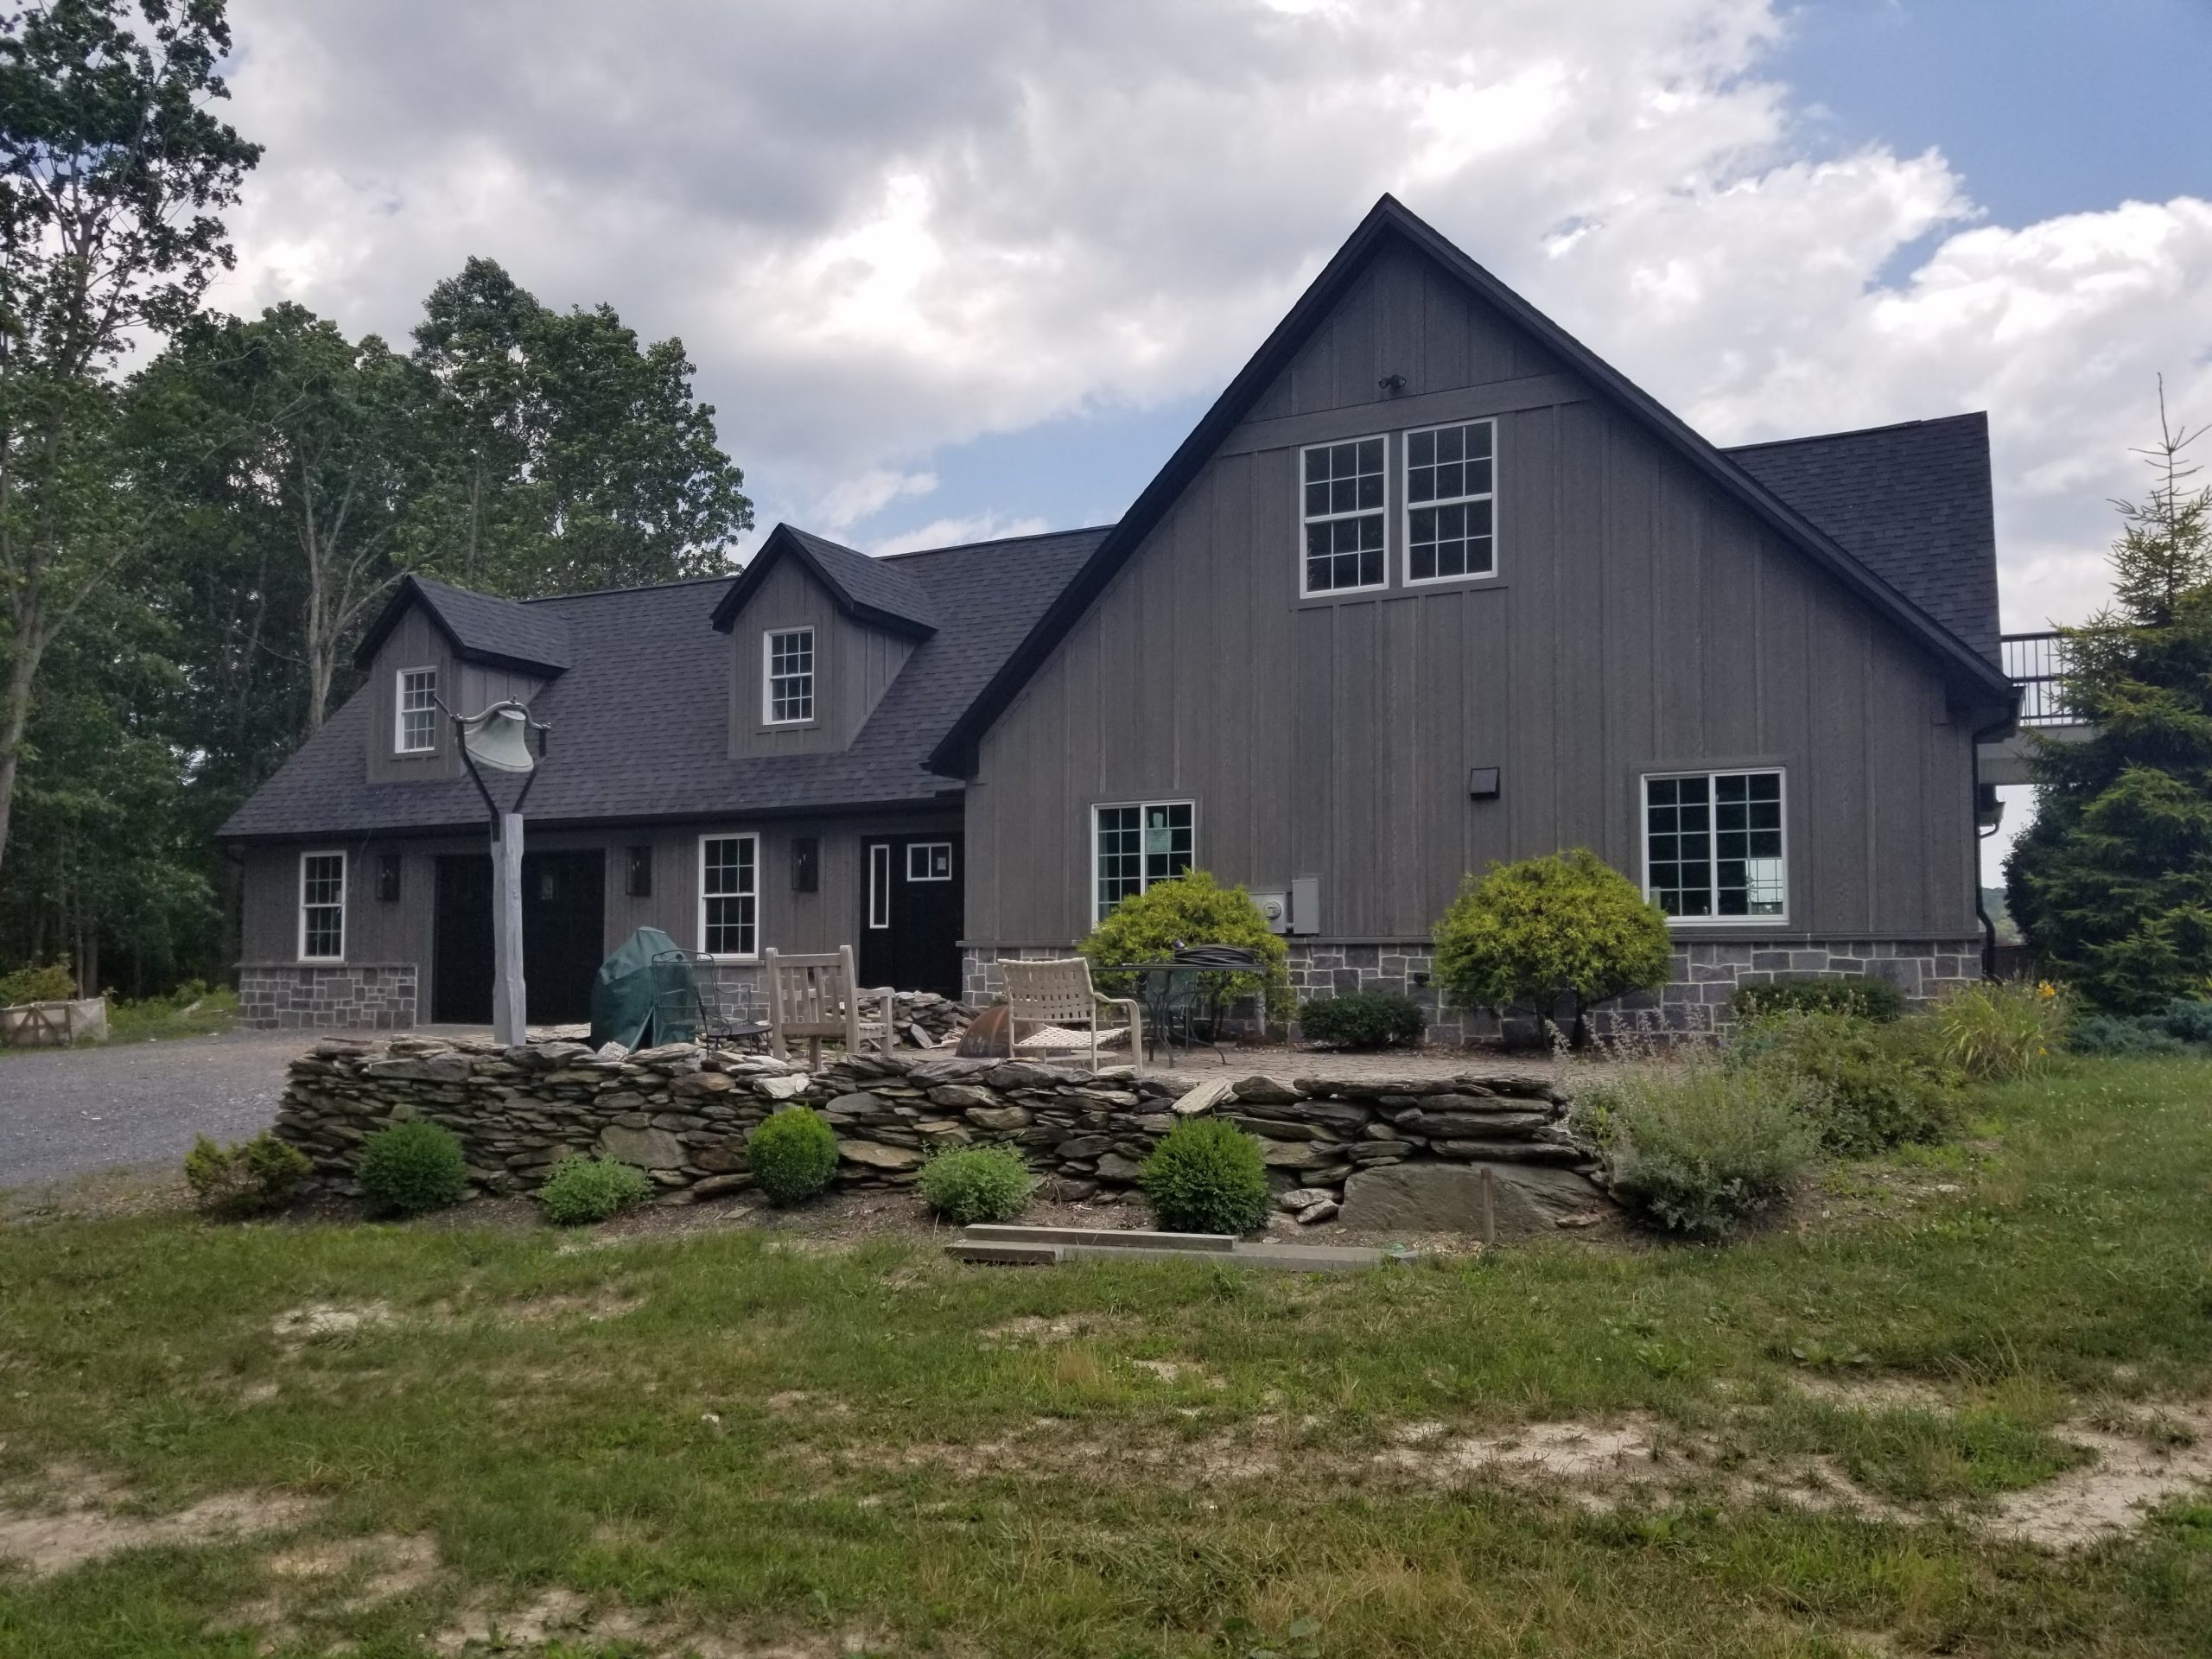 Back exterior view of a remodeled home with stone accents, gray siding, black roofing, an attached 1 car garage, and a patio with chairs.